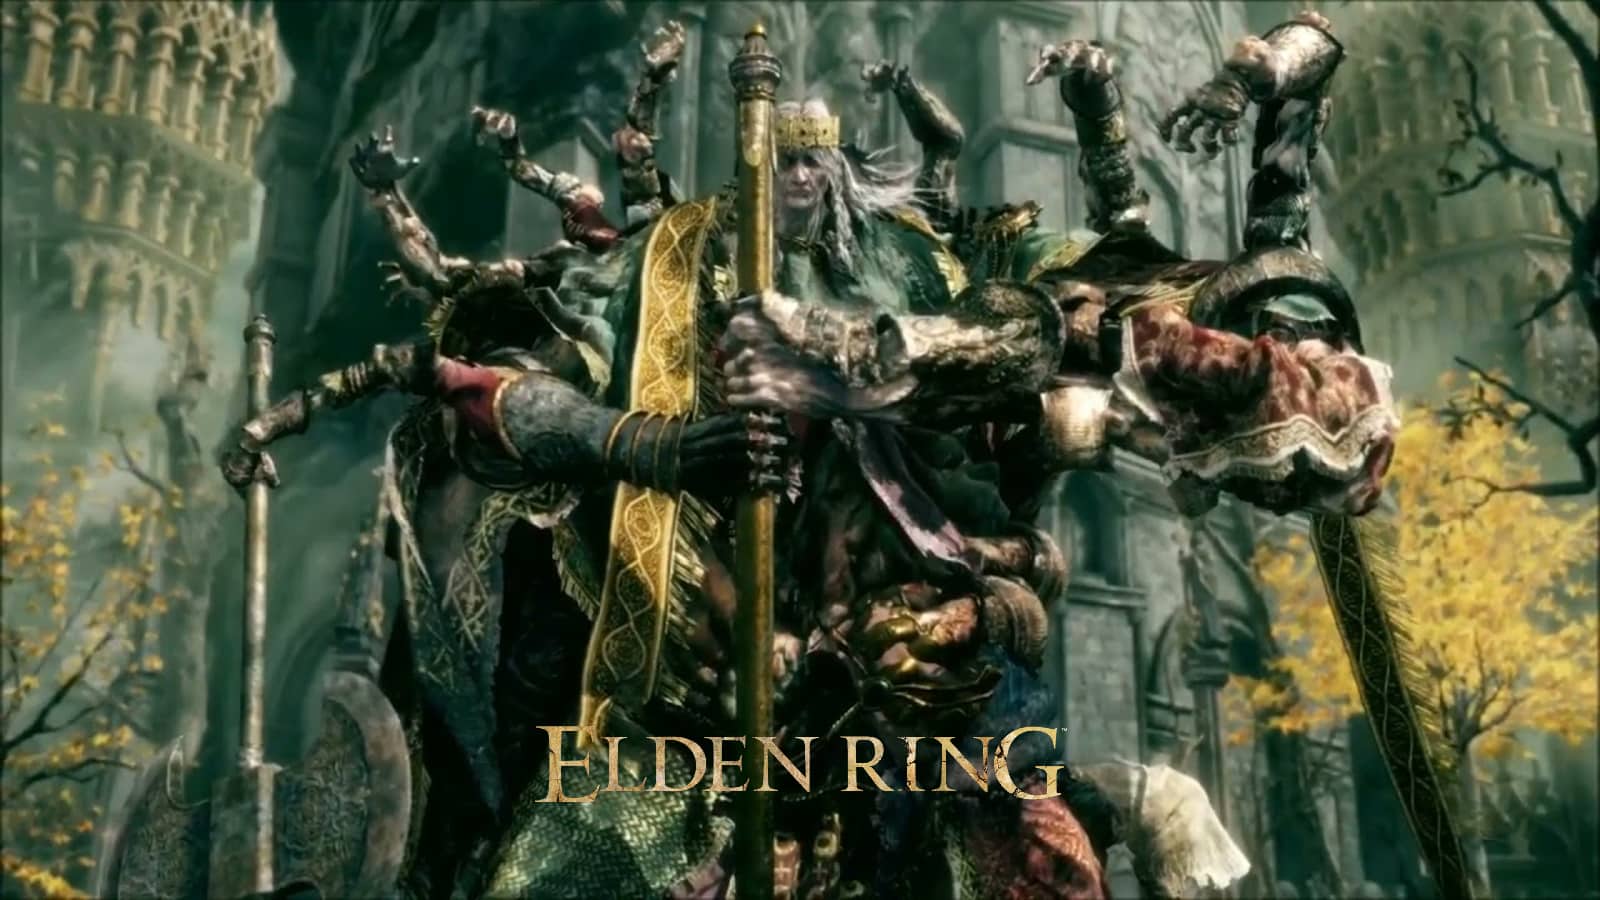 What Happens In Elden Ring? The Game's Story, Part 12: Becoming